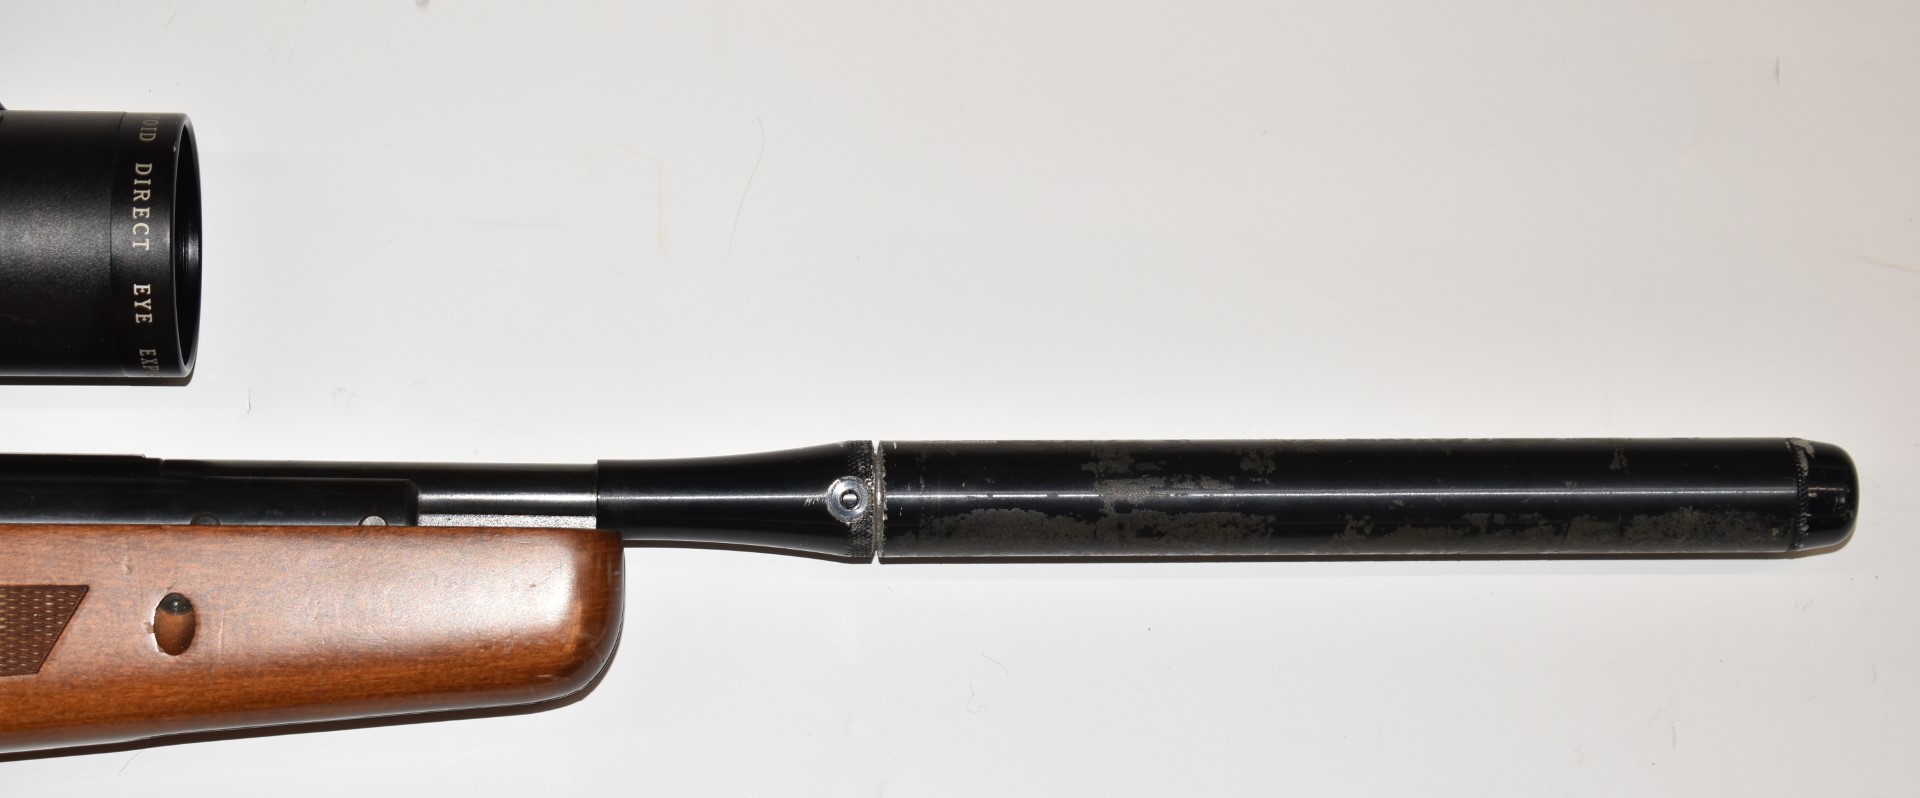 BSA .22 air rifle with chequered semi-pistol grip and forend, raised cheek piece, sound moderator - Image 5 of 10